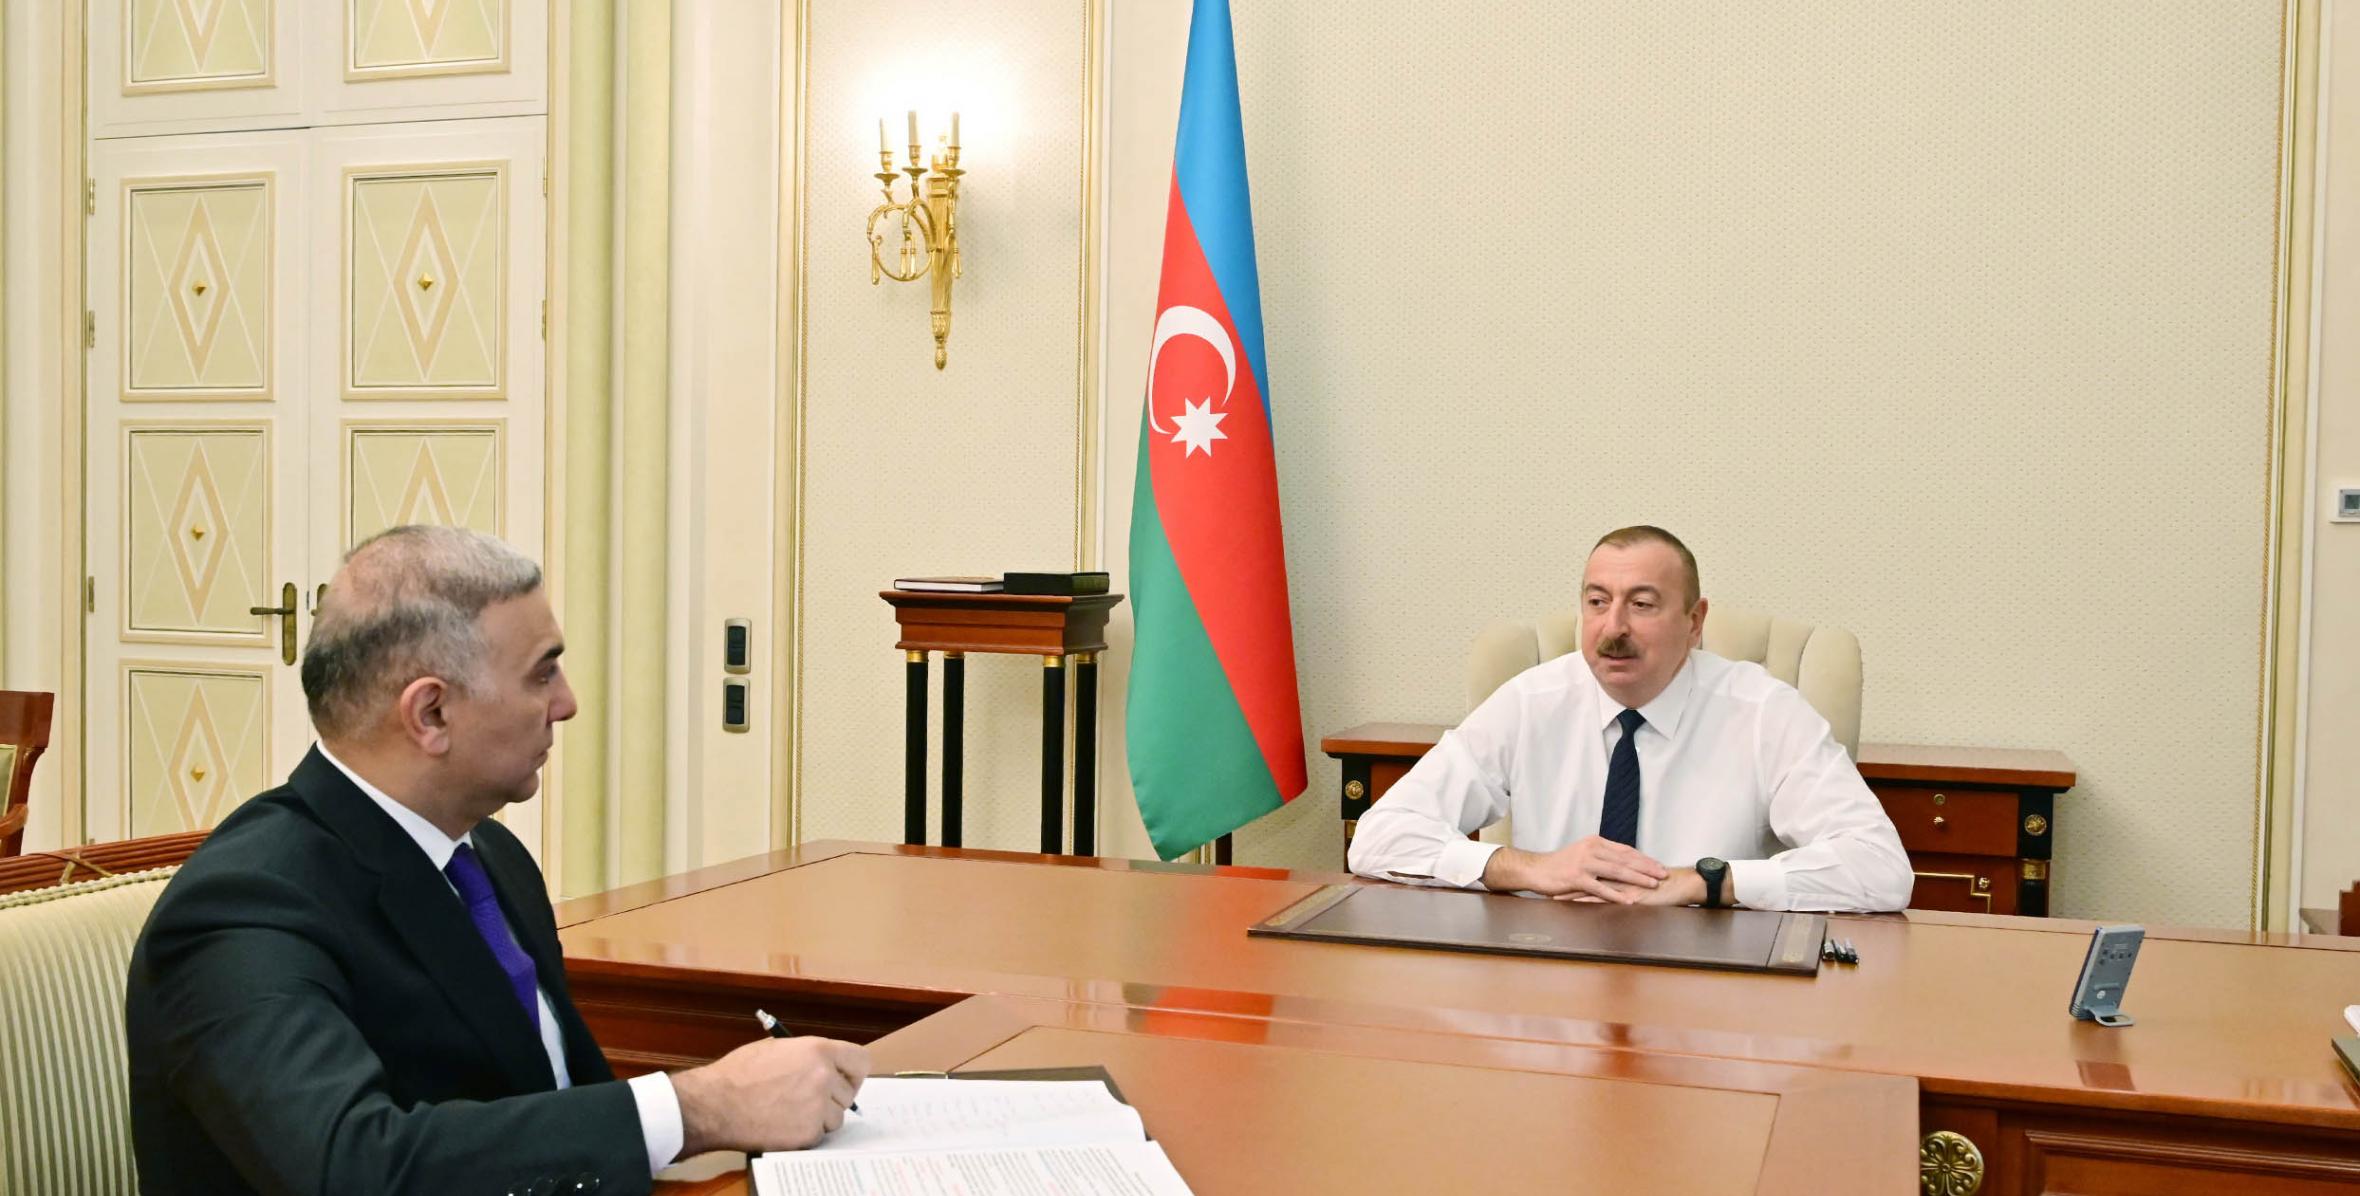 Ilham Aliyev received Vugar Ahmadov on his appointment as chairman of Azerishig Open Joint Stock Company